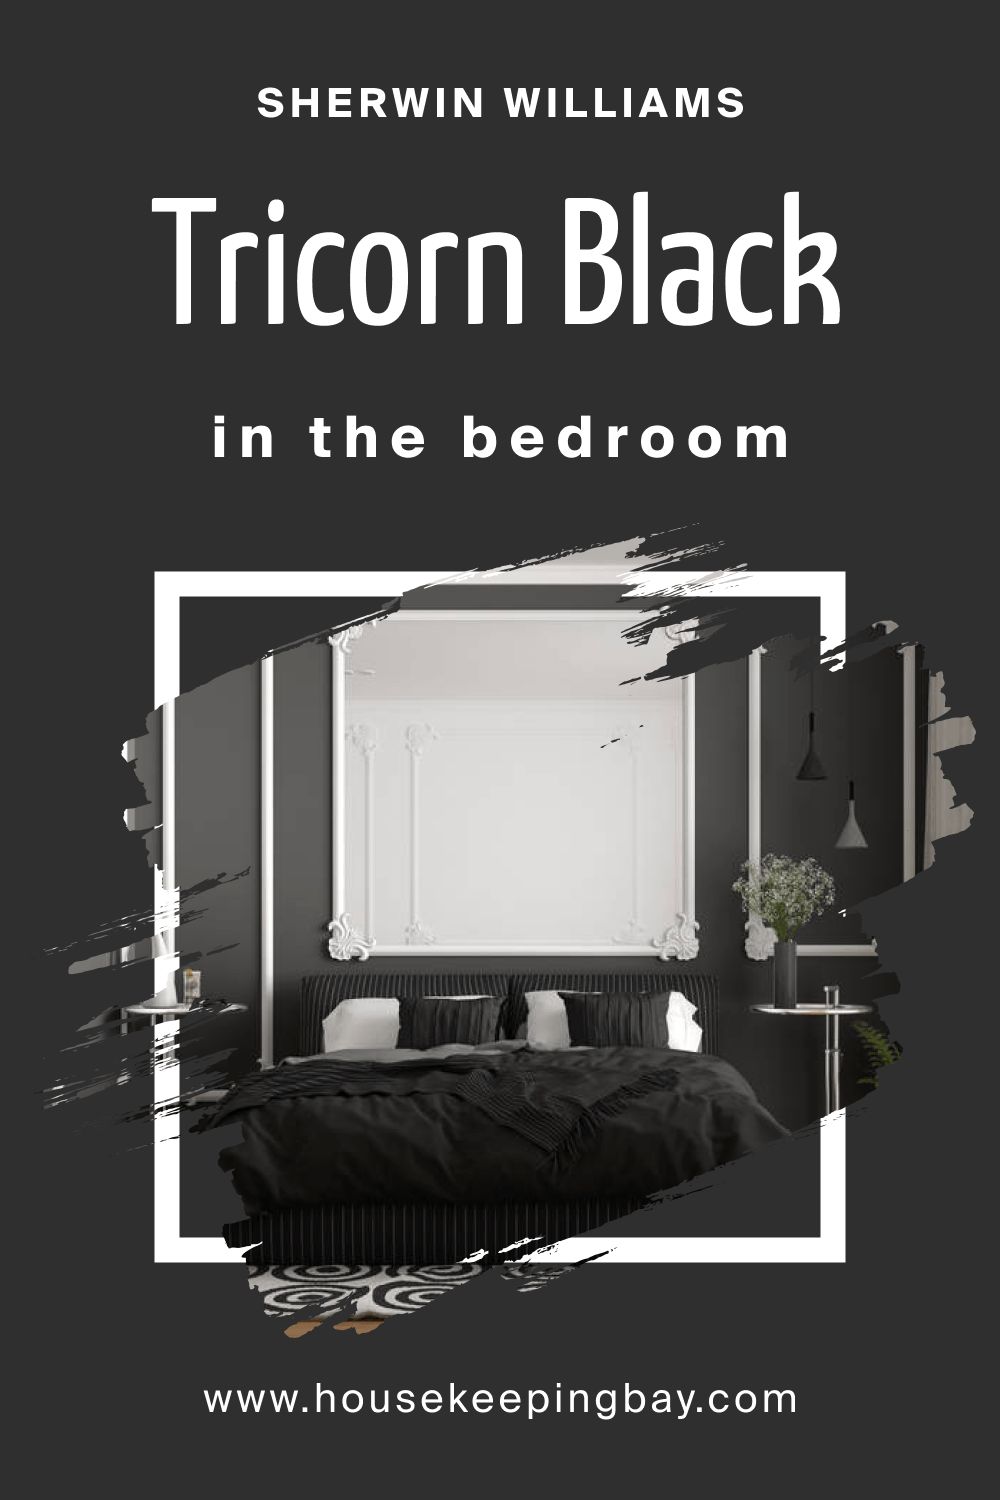 Sherwin Williams. SW 6258 Tricorn Black For the bedroom